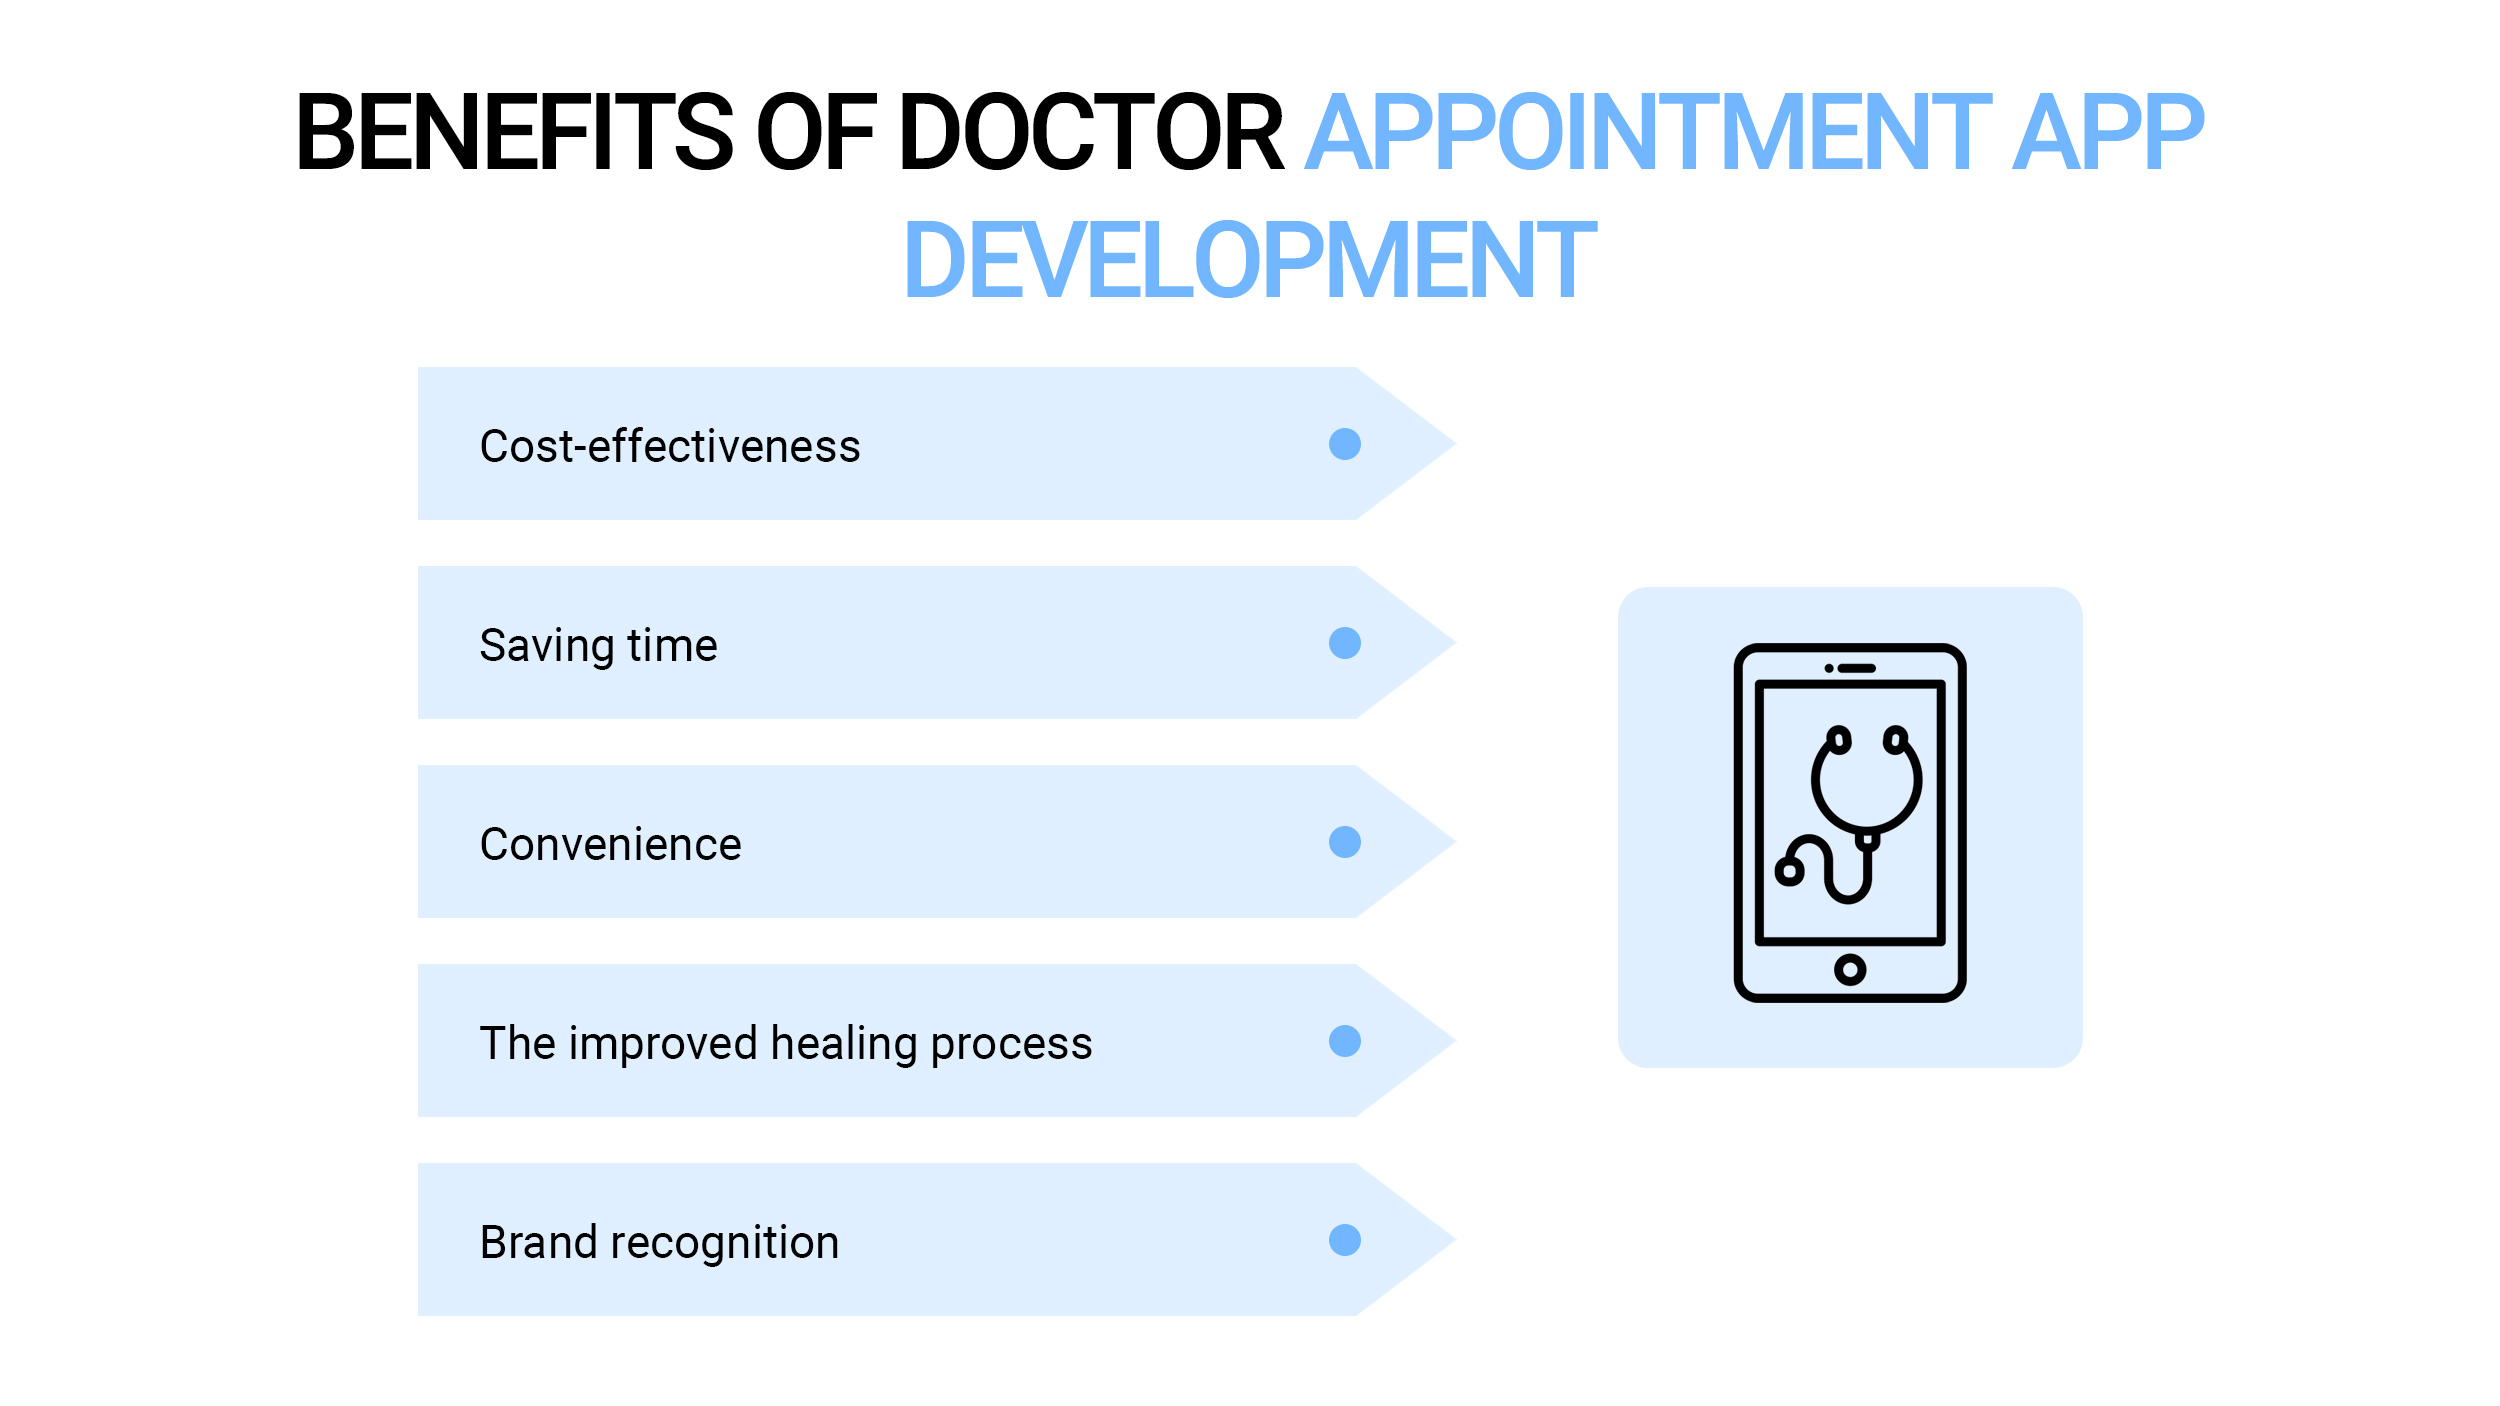 Benefits of doctor appointment app development